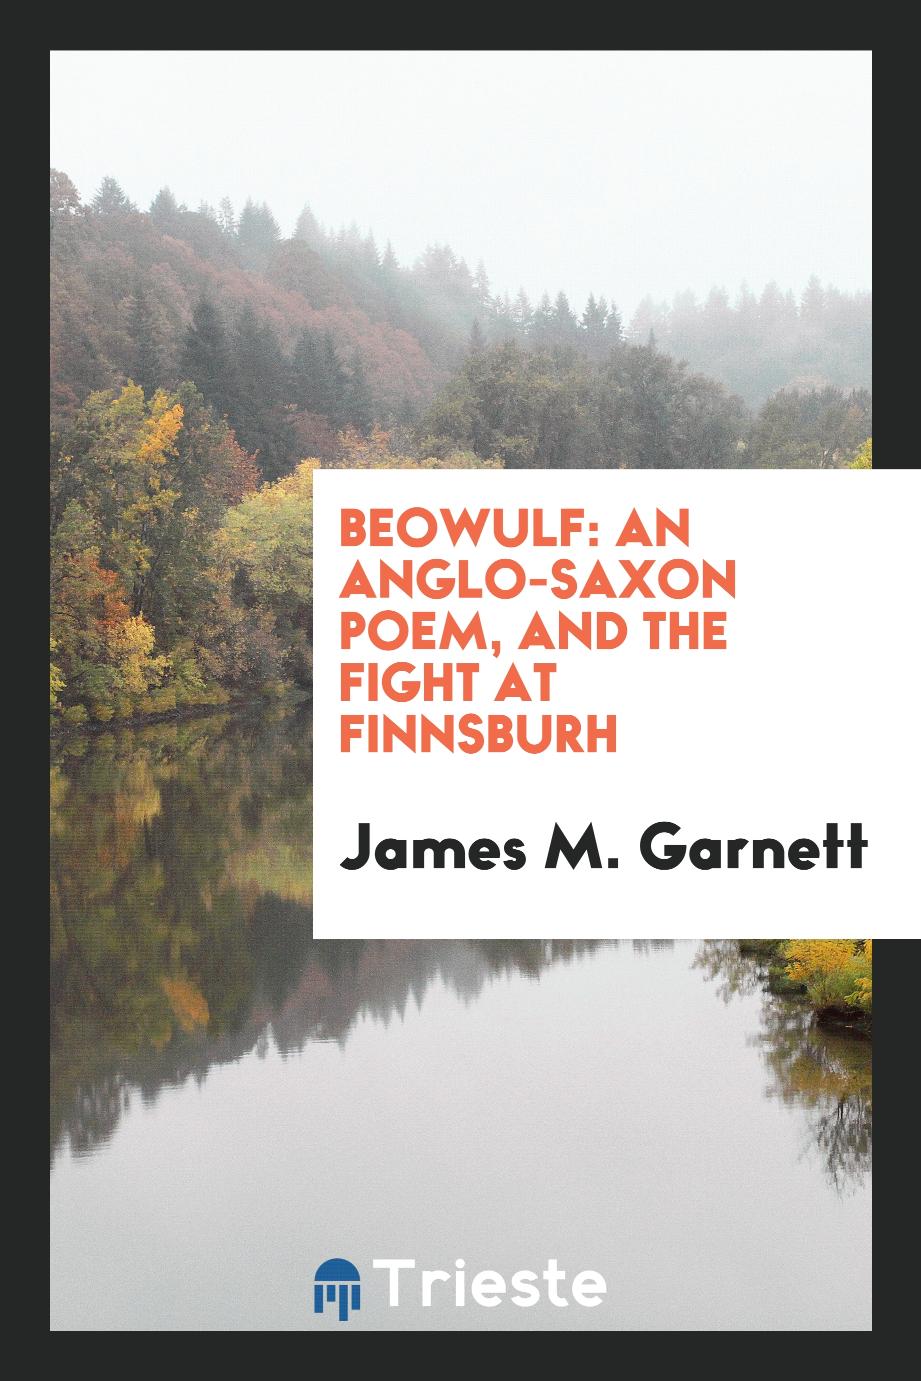 Beowulf: An Anglo-Saxon Poem, and The Fight at Finnsburh